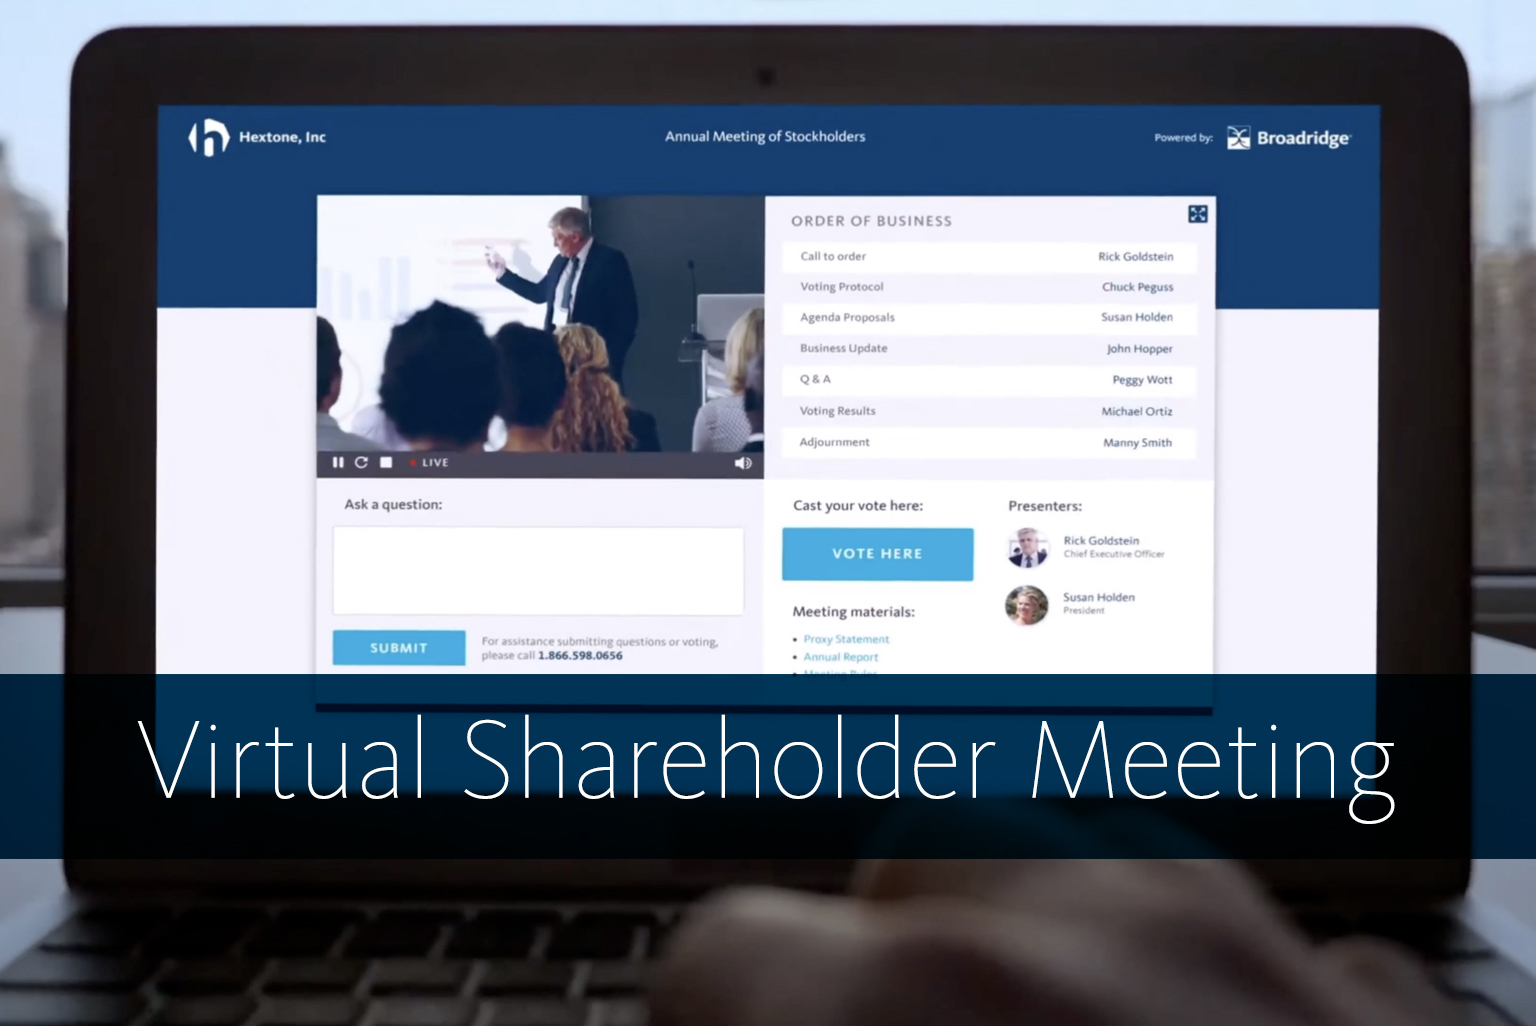 The Upgraded Virtual Shareholder Meeting